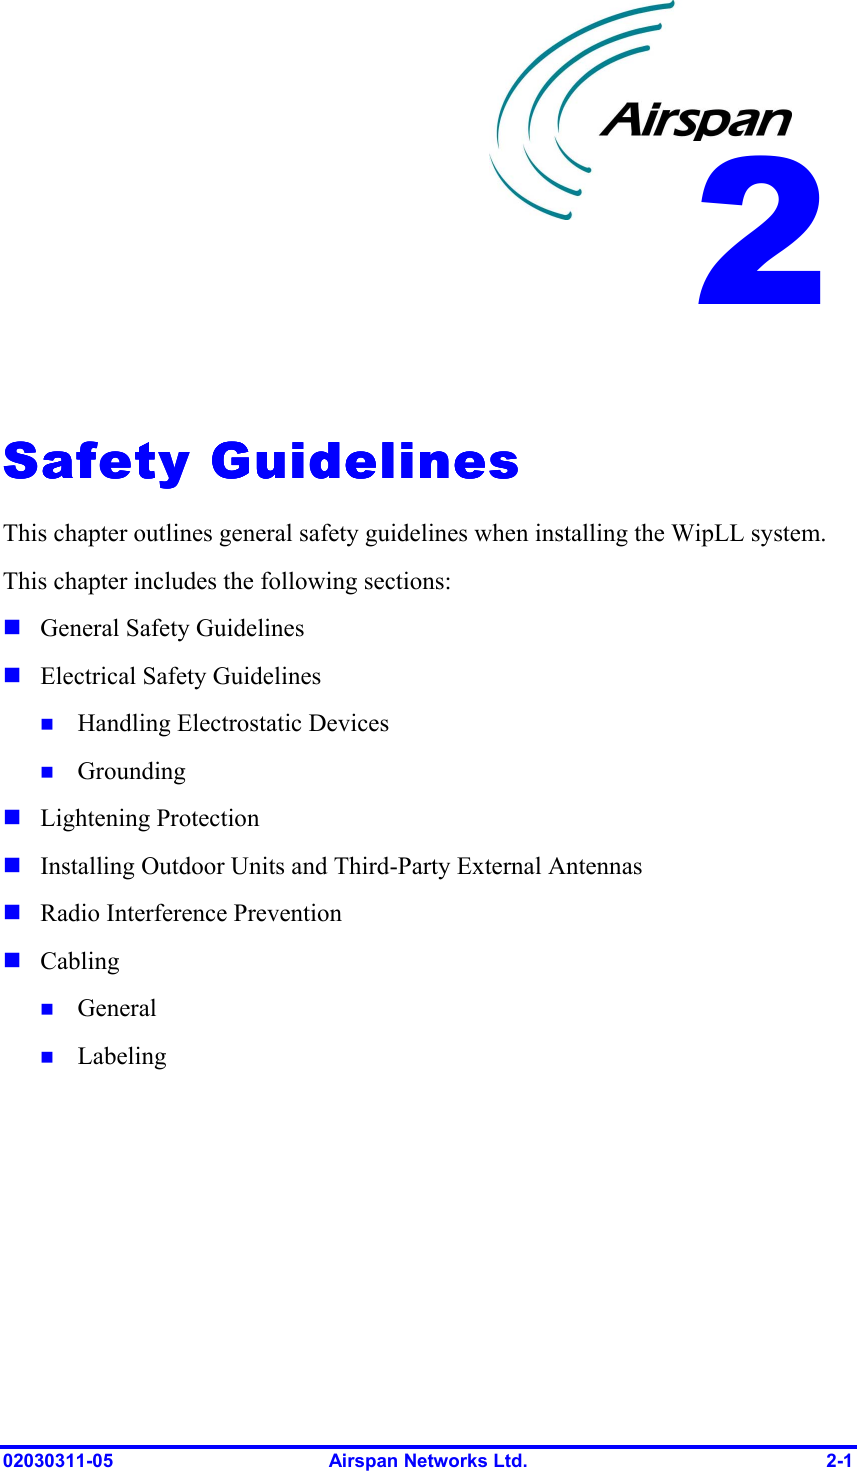  02030311-05  Airspan Networks Ltd.  2-1   Safety GuidelinesSafety GuidelinesSafety GuidelinesSafety Guidelines    This chapter outlines general safety guidelines when installing the WipLL system. This chapter includes the following sections: ! General Safety Guidelines ! Electrical Safety Guidelines !  Handling Electrostatic Devices !  Grounding  ! Lightening Protection ! Installing Outdoor Units and Third-Party External Antennas ! Radio Interference Prevention ! Cabling !  General !  Labeling 2 